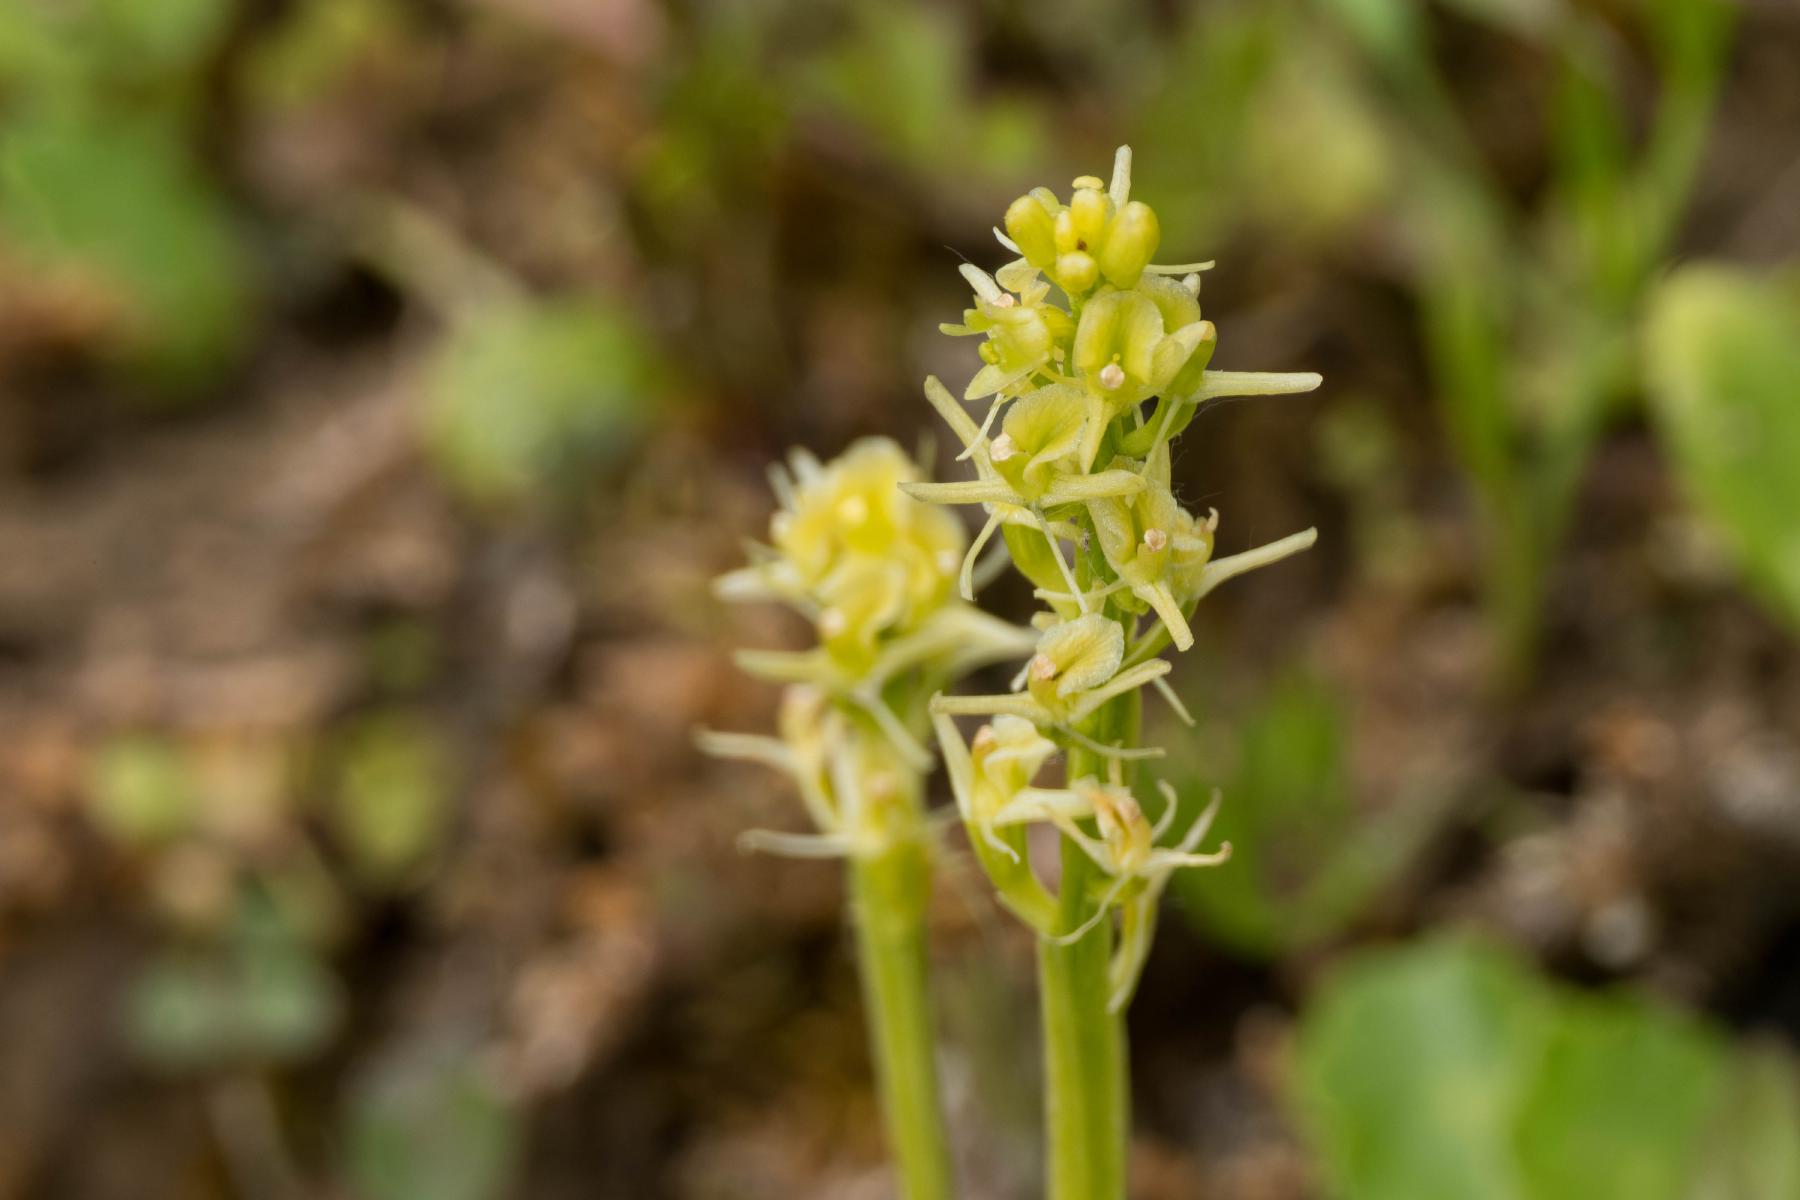 another closeup of a fen orchid where you can see their upturned flowers with gangly petals